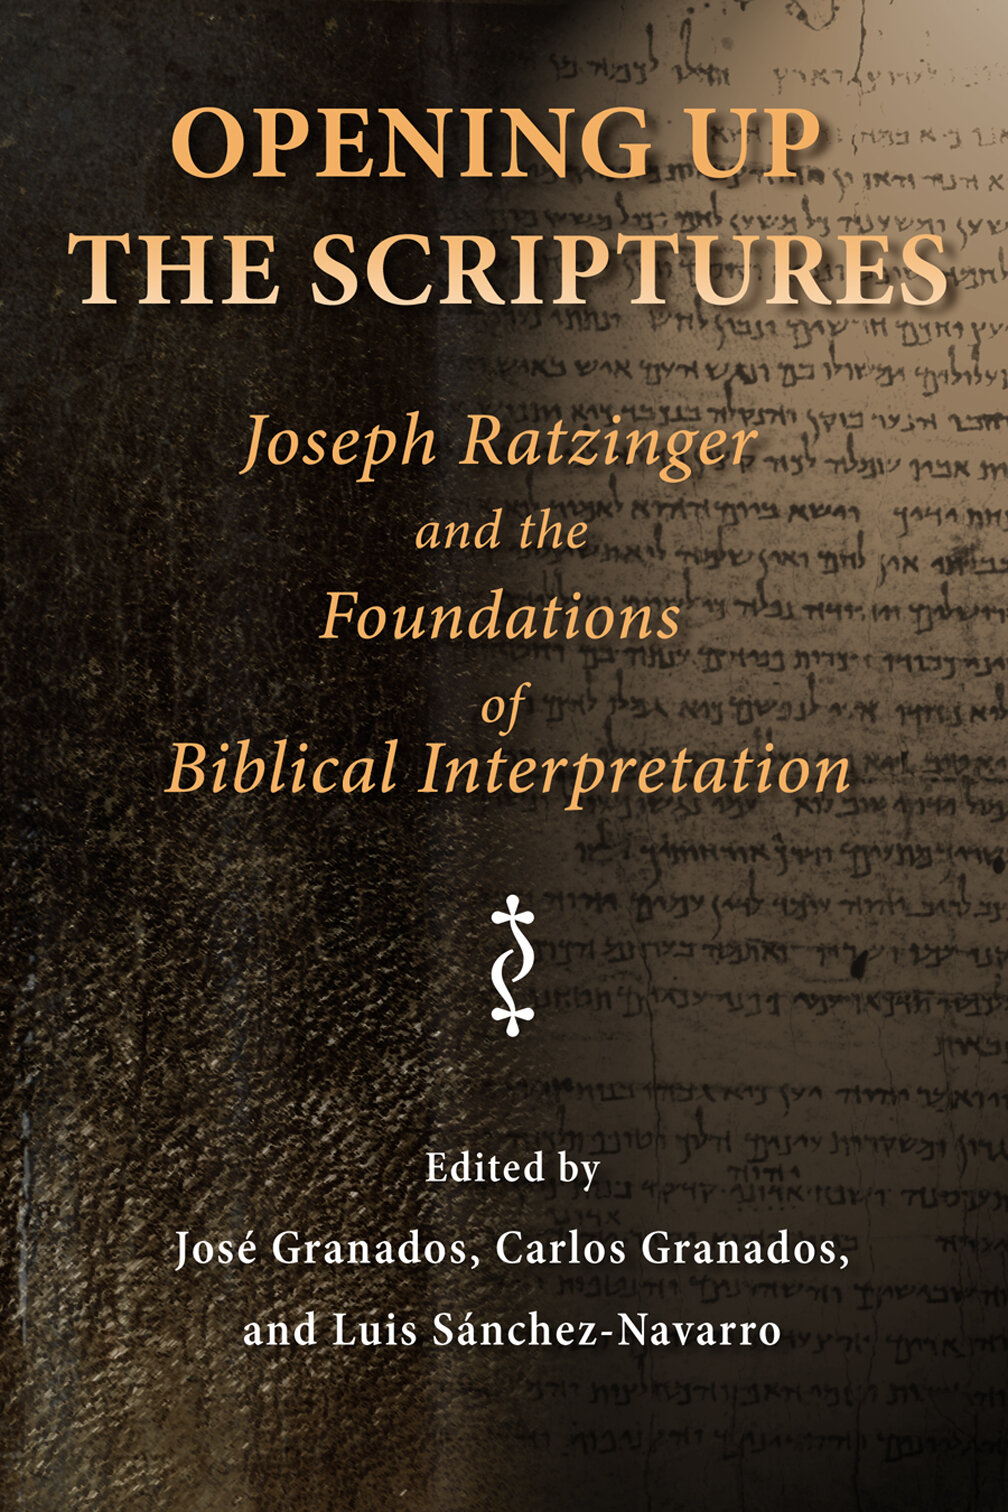 Opening Up the Scriptures: Joseph Ratzinger and the Foundations of Biblical Interpretation (Ressourcement: Retrieval and Renewal in Catholic Thought | RRRCT)